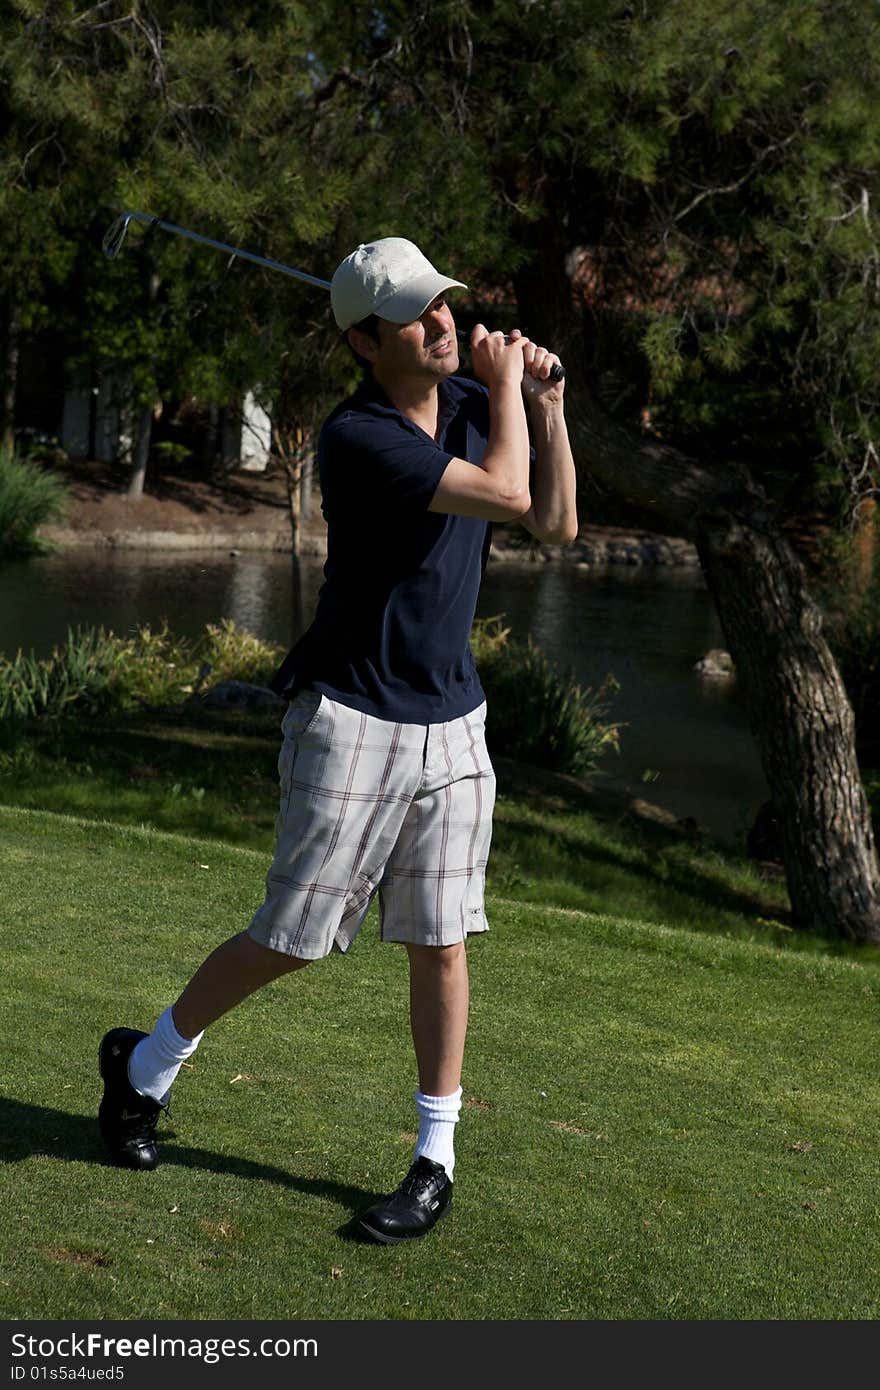 A golf player preparing to swing lining up shot. A golf player preparing to swing lining up shot